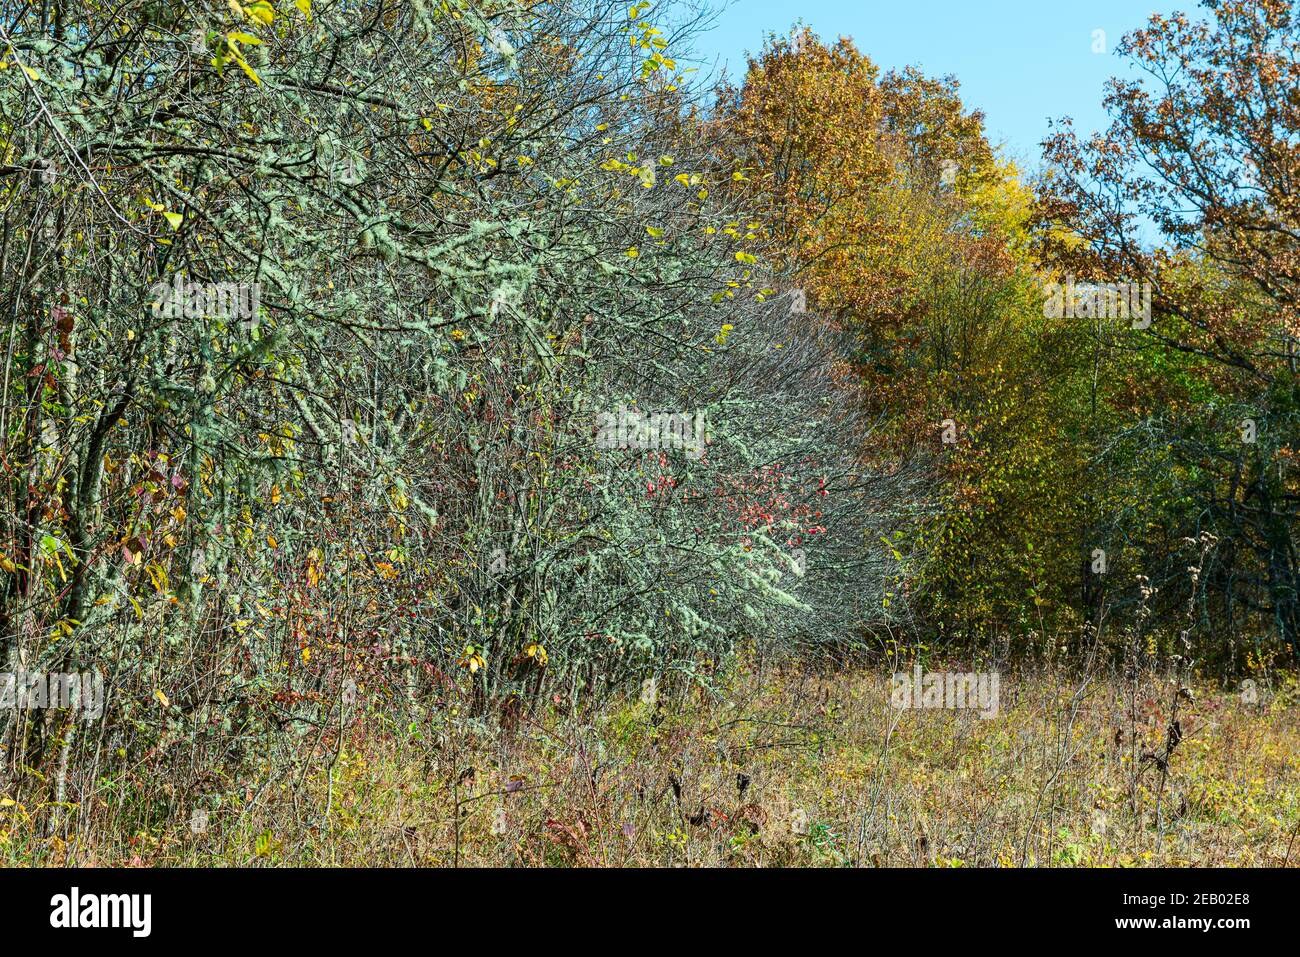 Wild trees and shrubs affected by scab disease Stock Photo